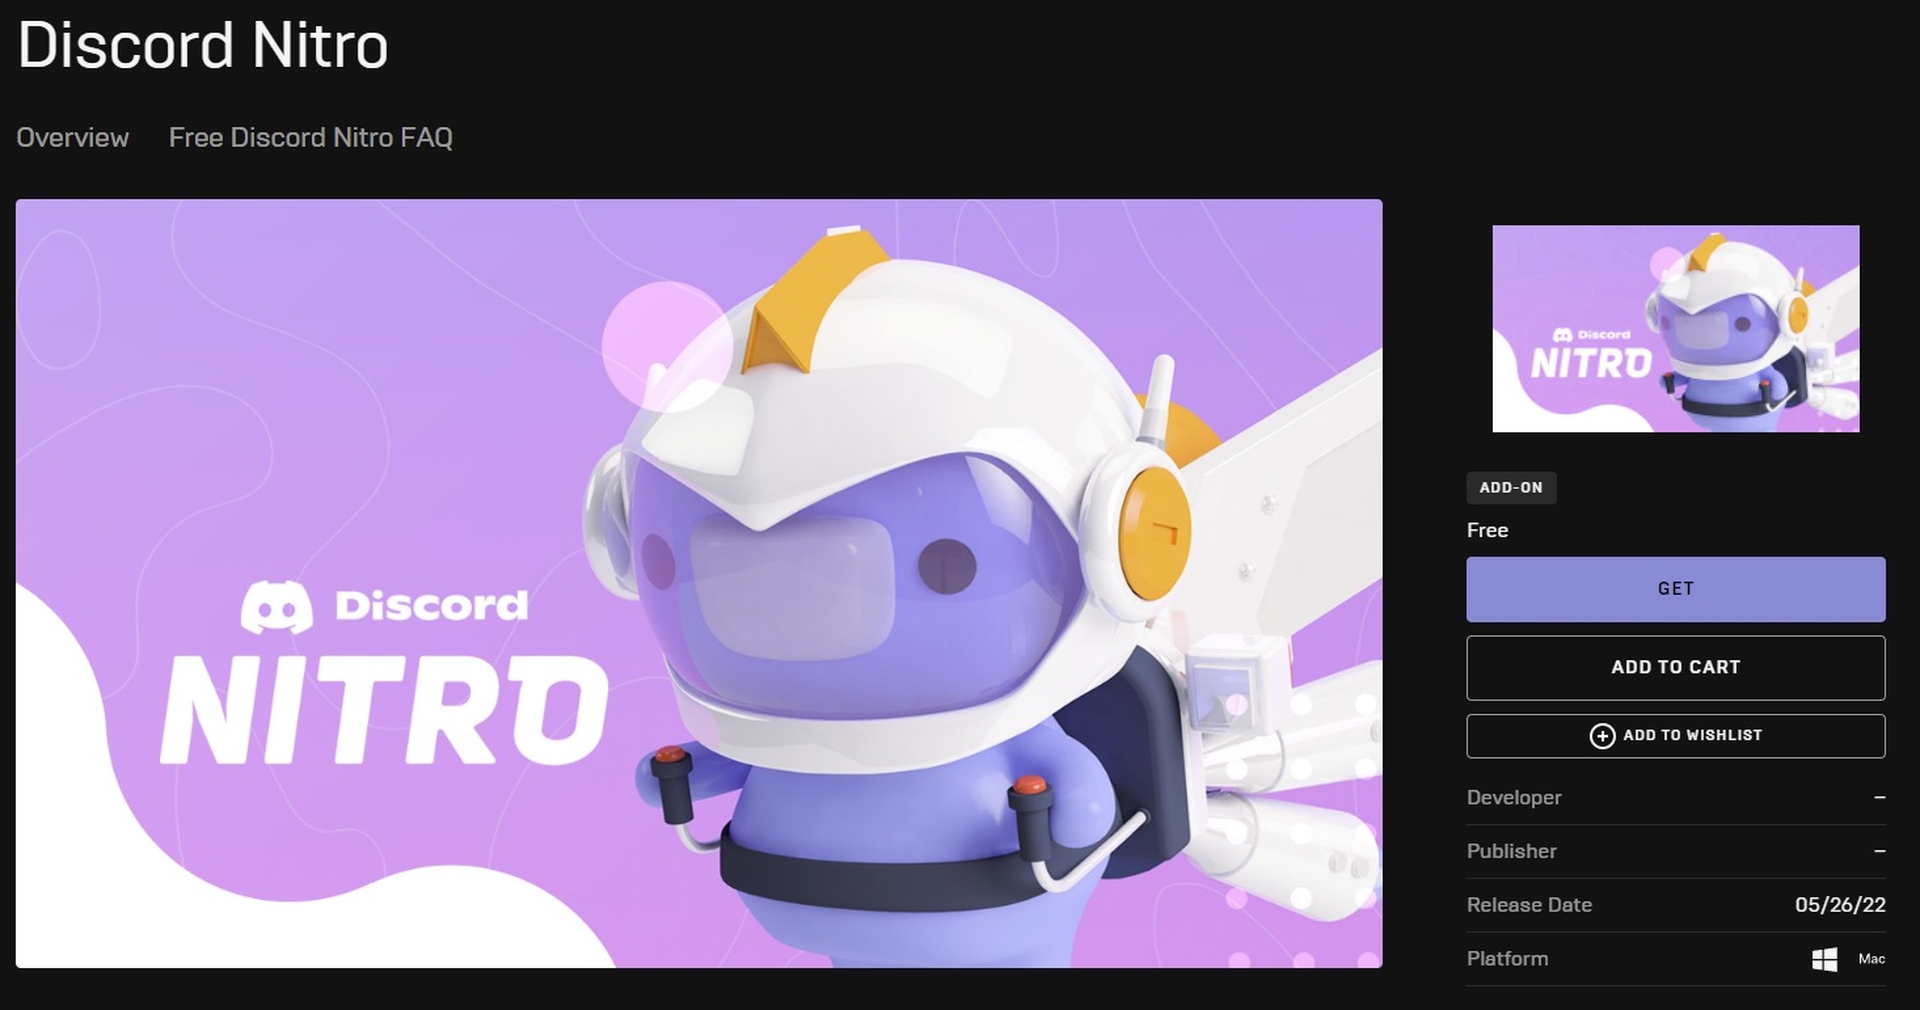 In this article, we are going to go over how to claim Discord Nitro Epic Games, so you can enjoy the features that Discord Nitro provides for free.